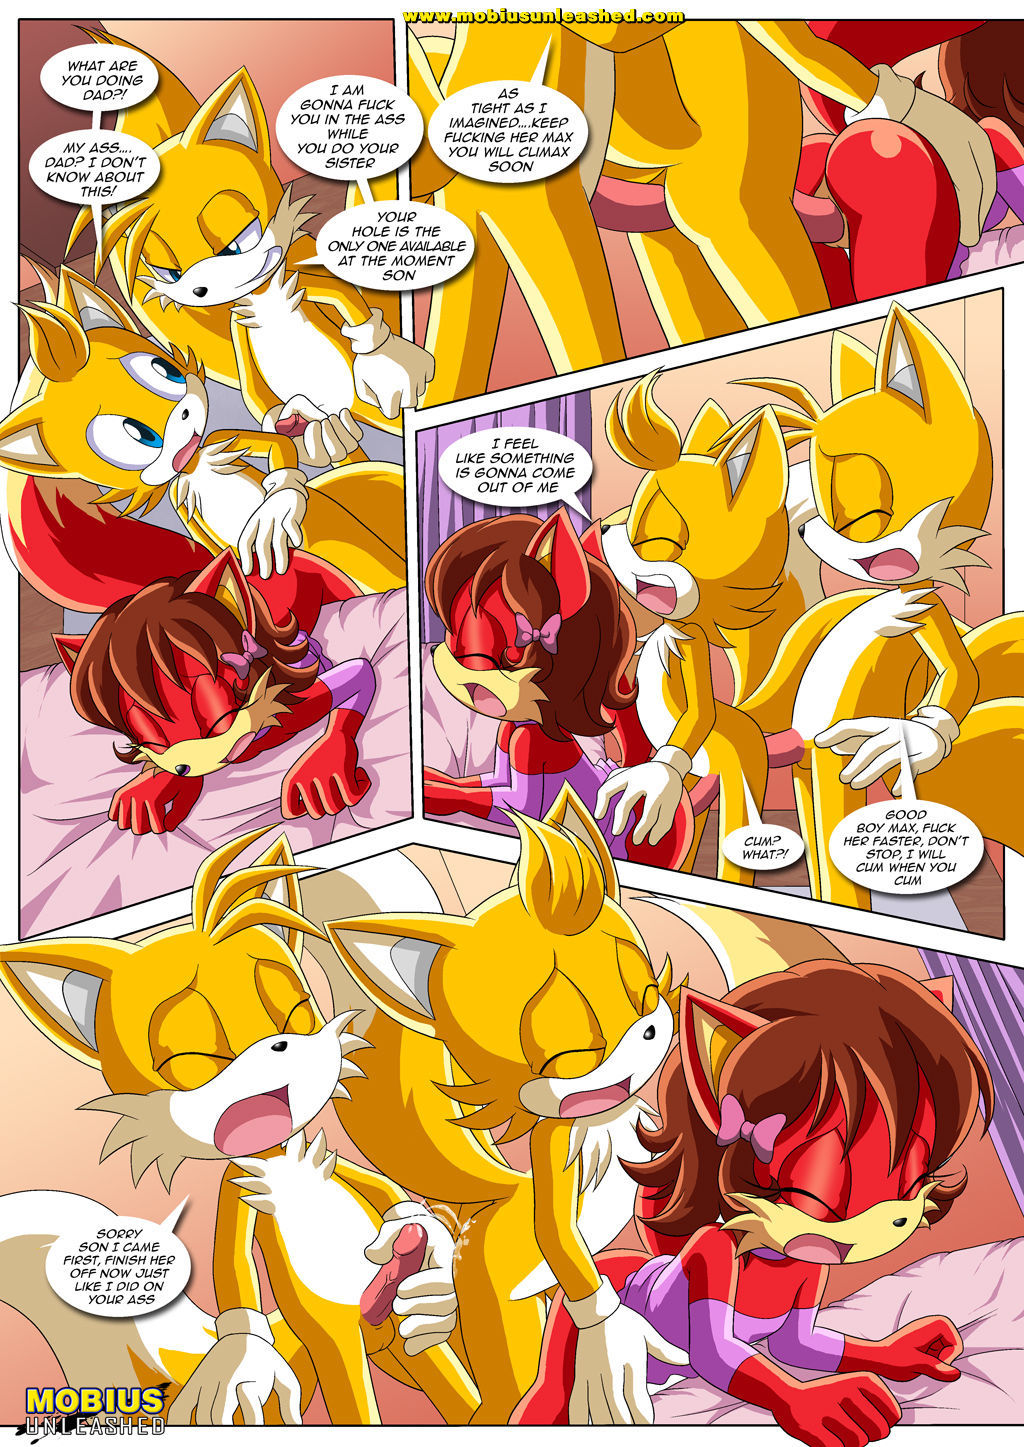 The Prower Family Affair (Sonic The Hedgehog) by Palcomix page 8